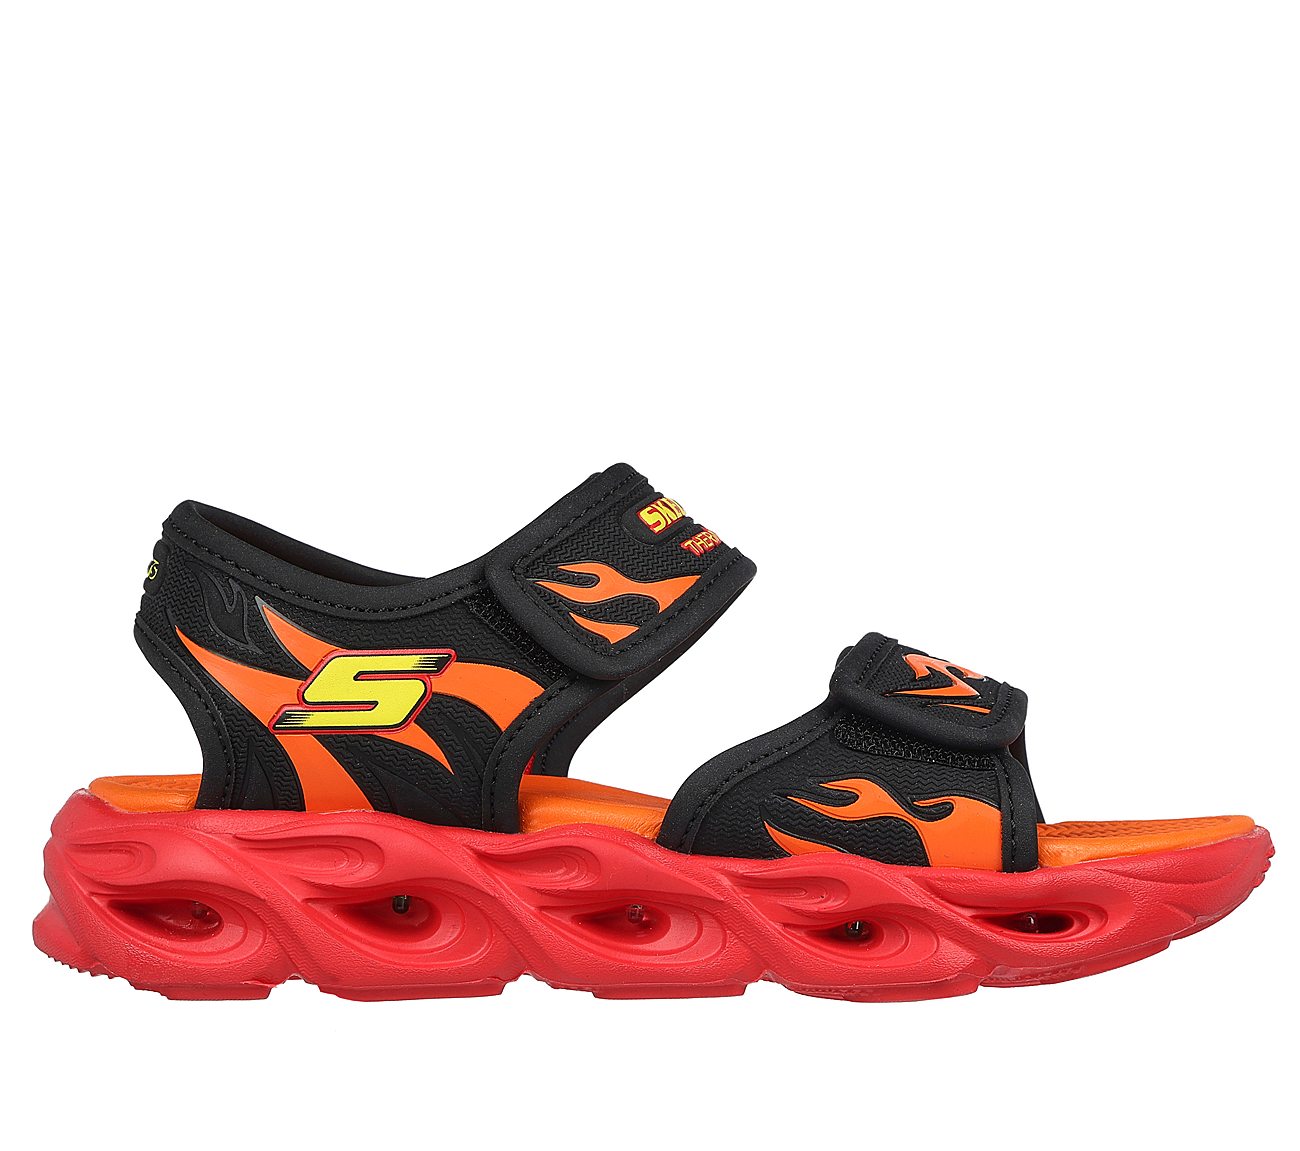 THERMO-SPLASH - HEAT TIDE, BLACK/RED Footwear Lateral View